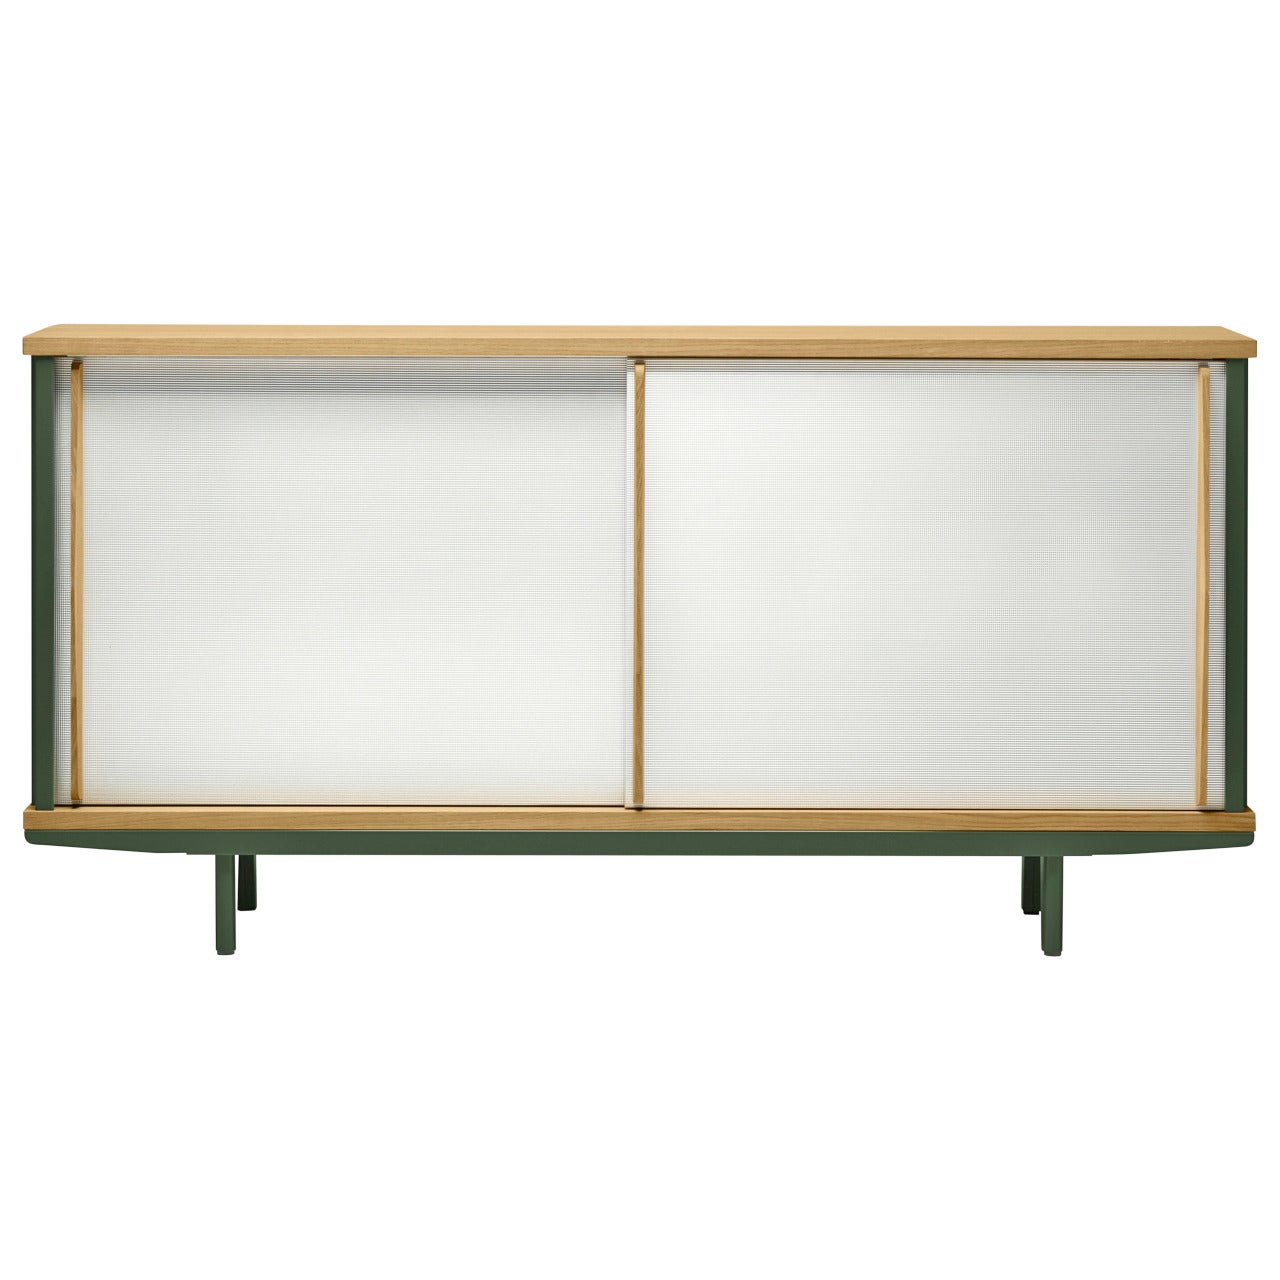 Sideboard Bahut by Jean Prouvé, Vitra RAW Edition 2015 For Sale